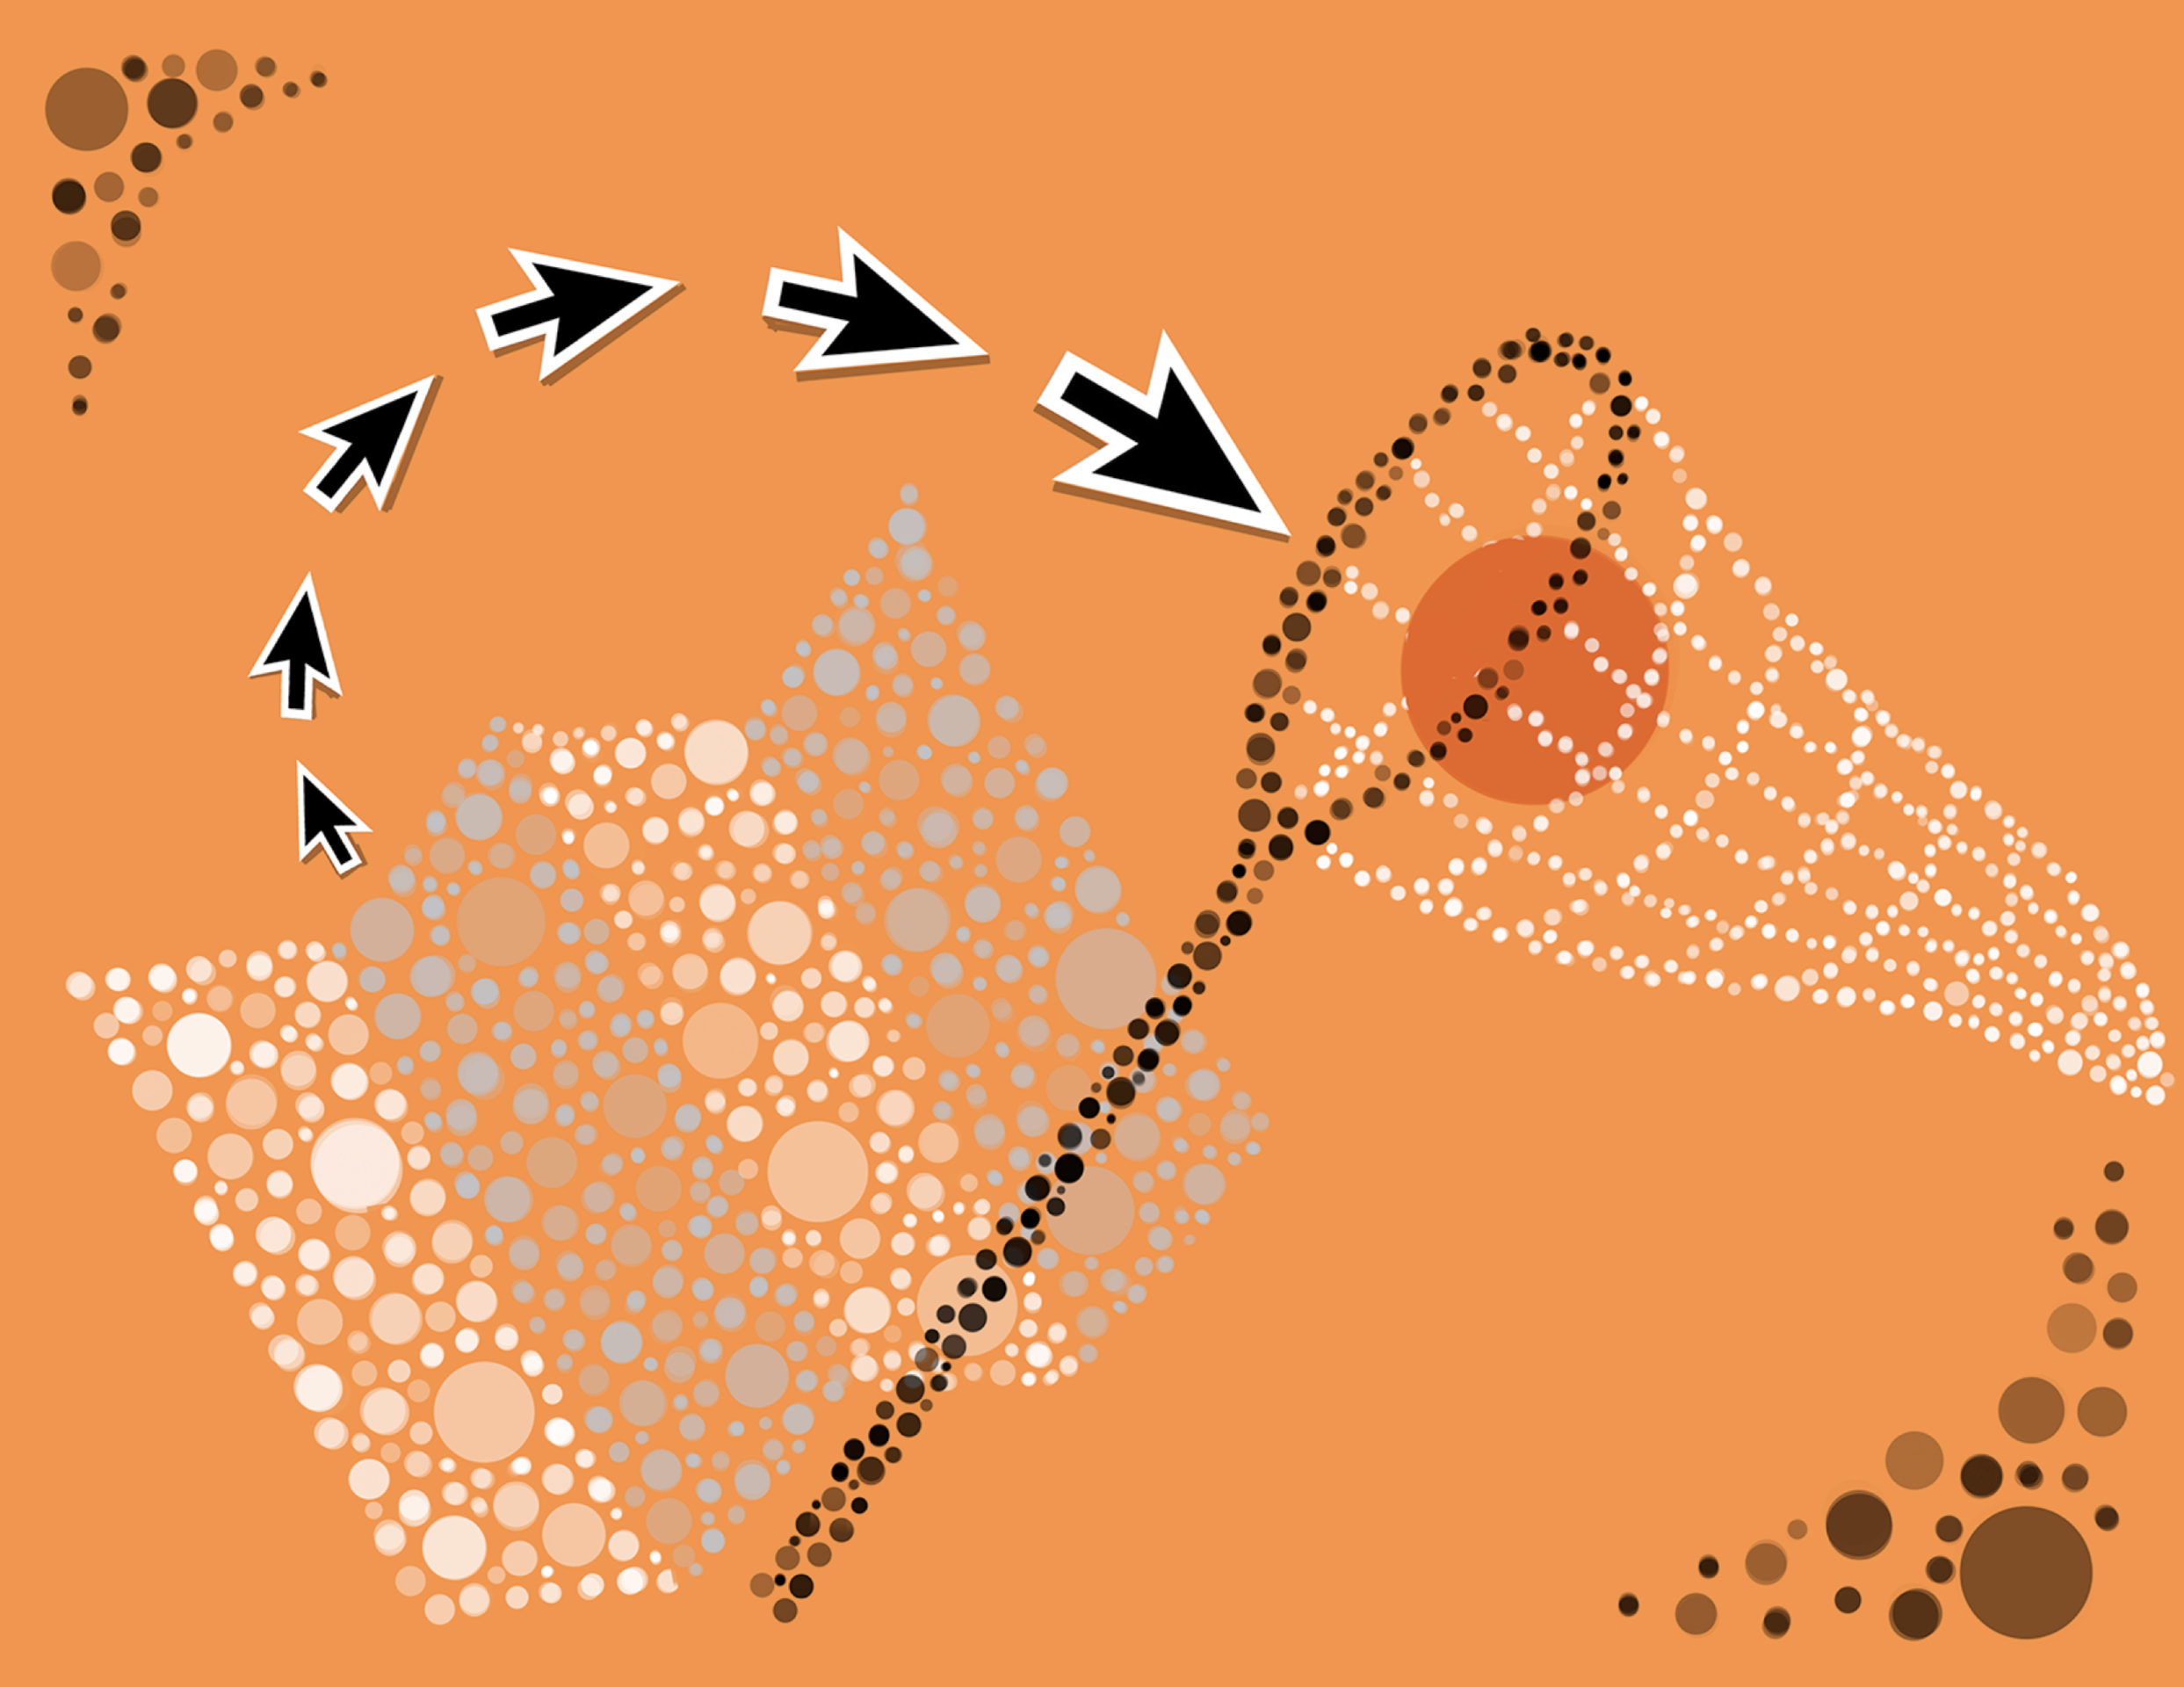 pointillistic style illustration featuring an abstract paper, and cursors leading a ball into a net.